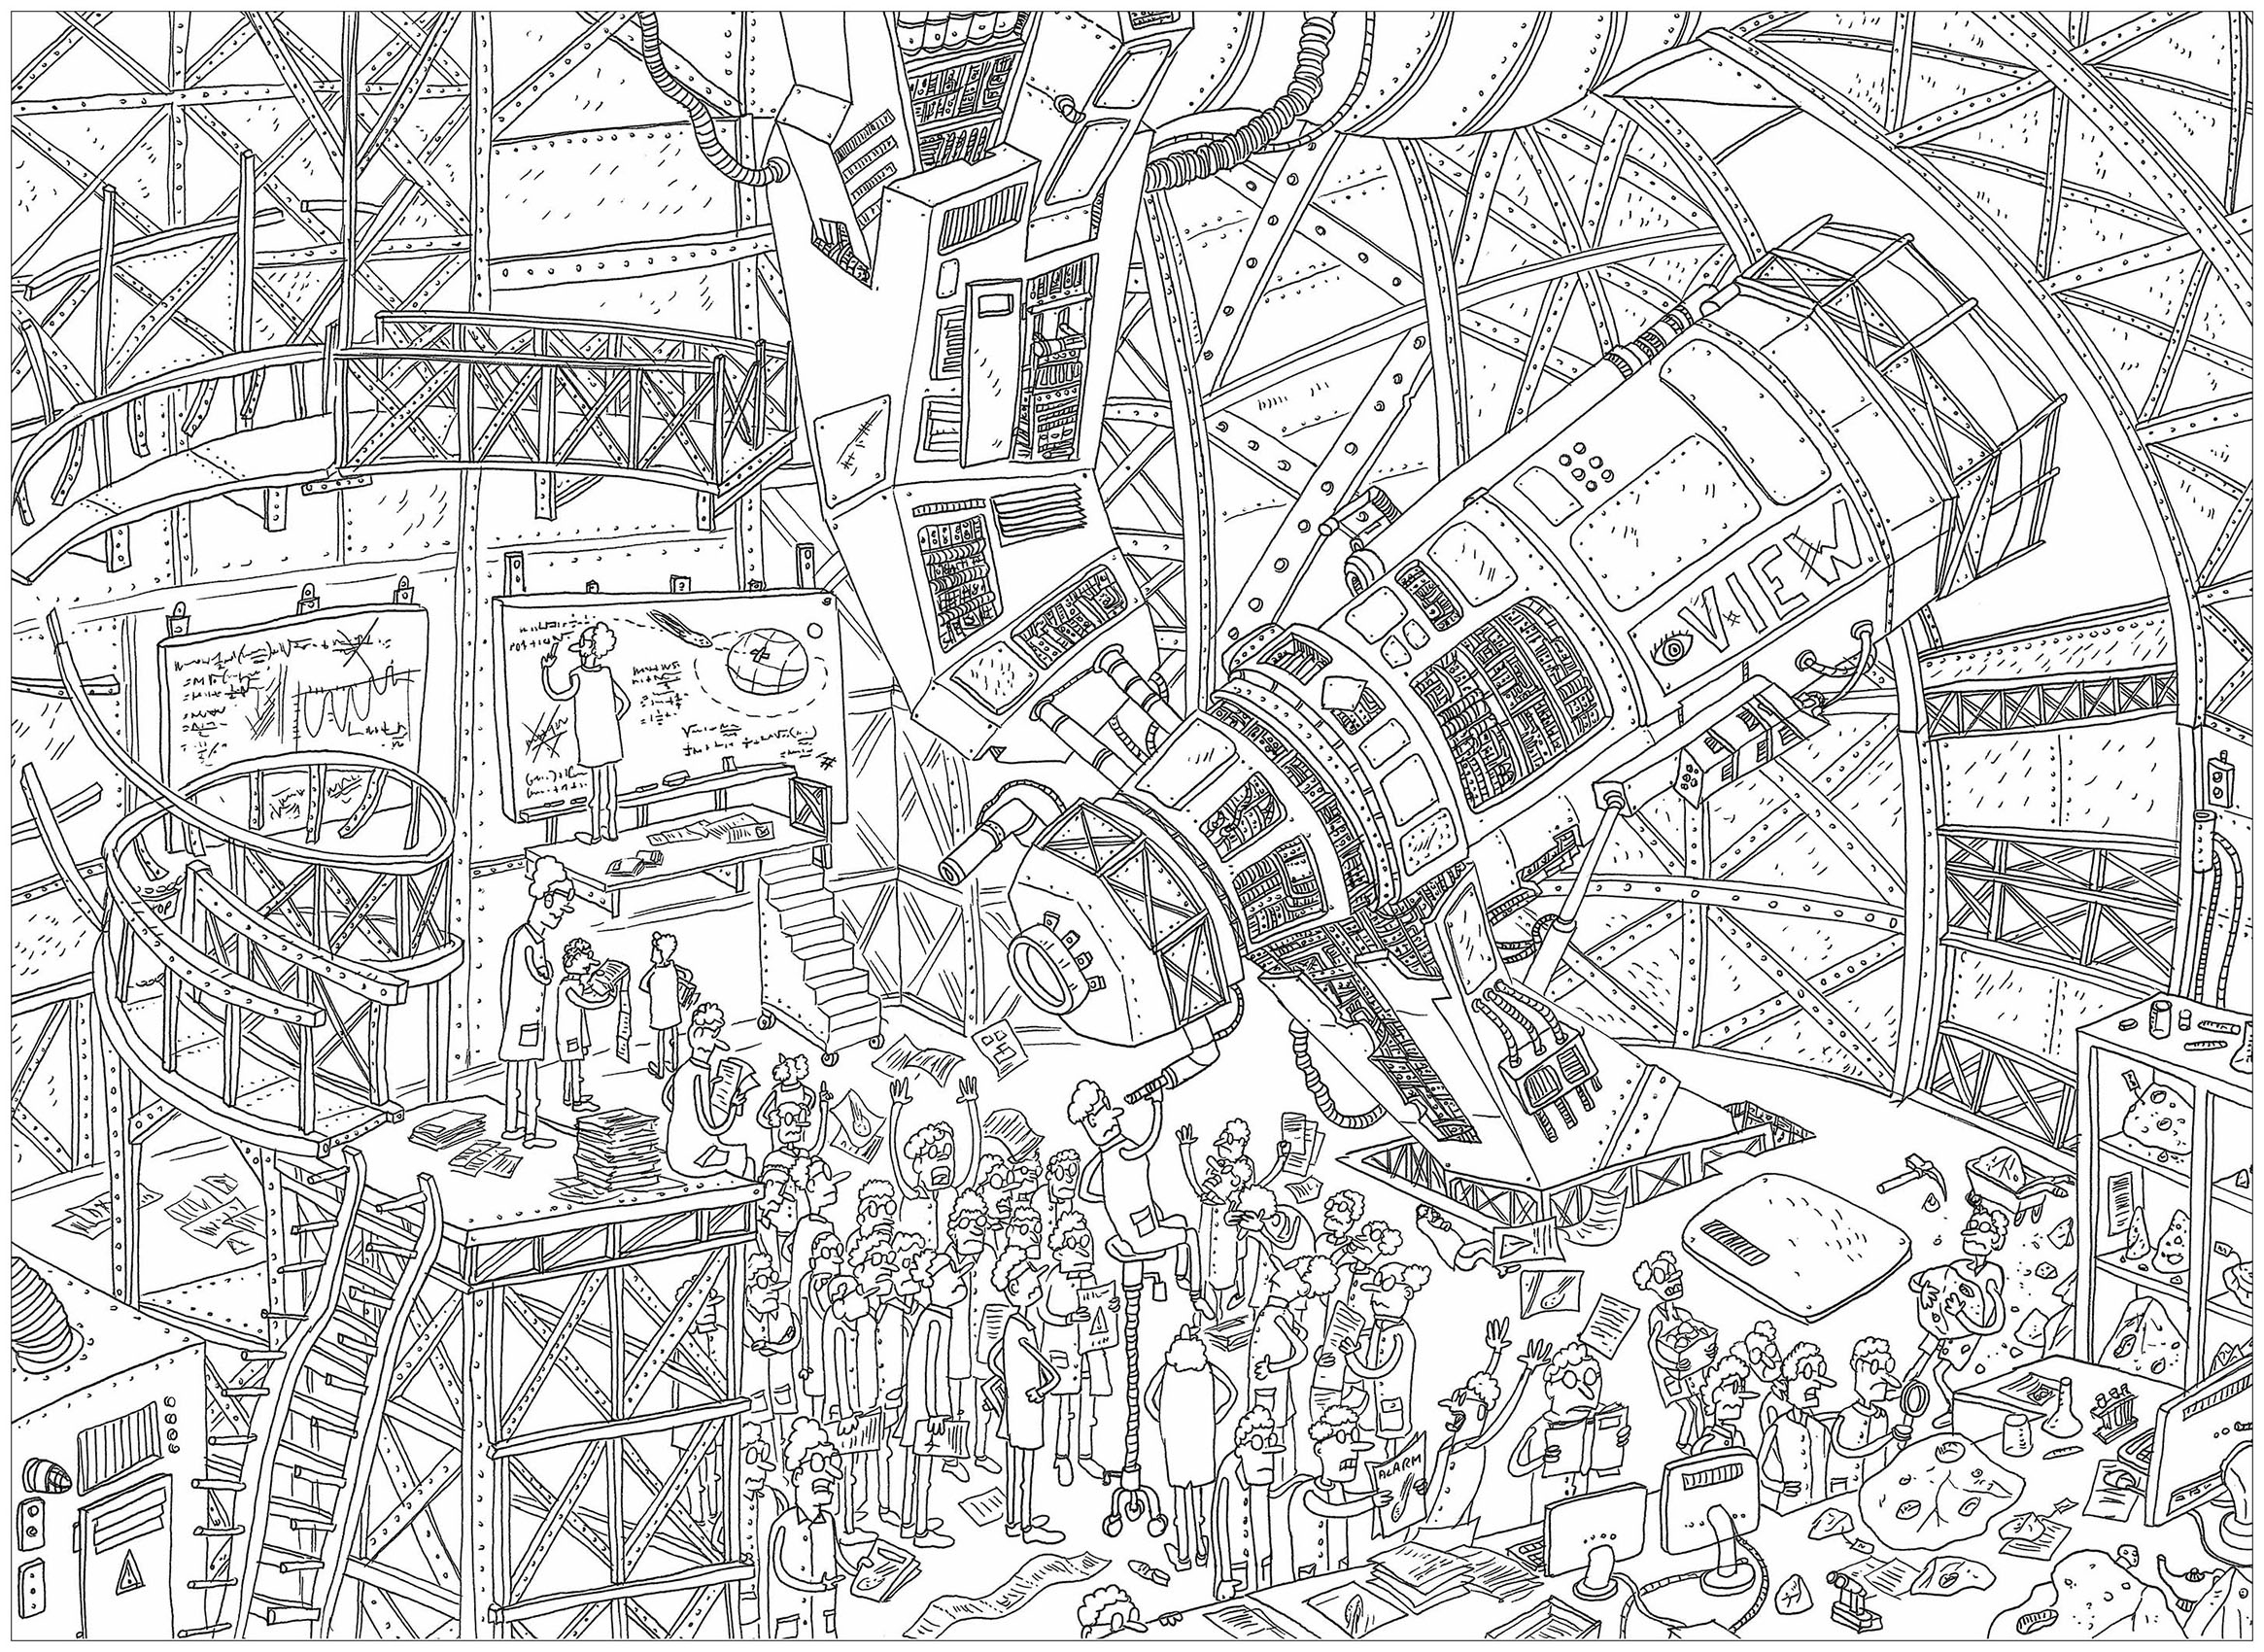 Giant Coloring Pages For Adults Coloring Giant Coloring Sheet Adult Complex Telescope